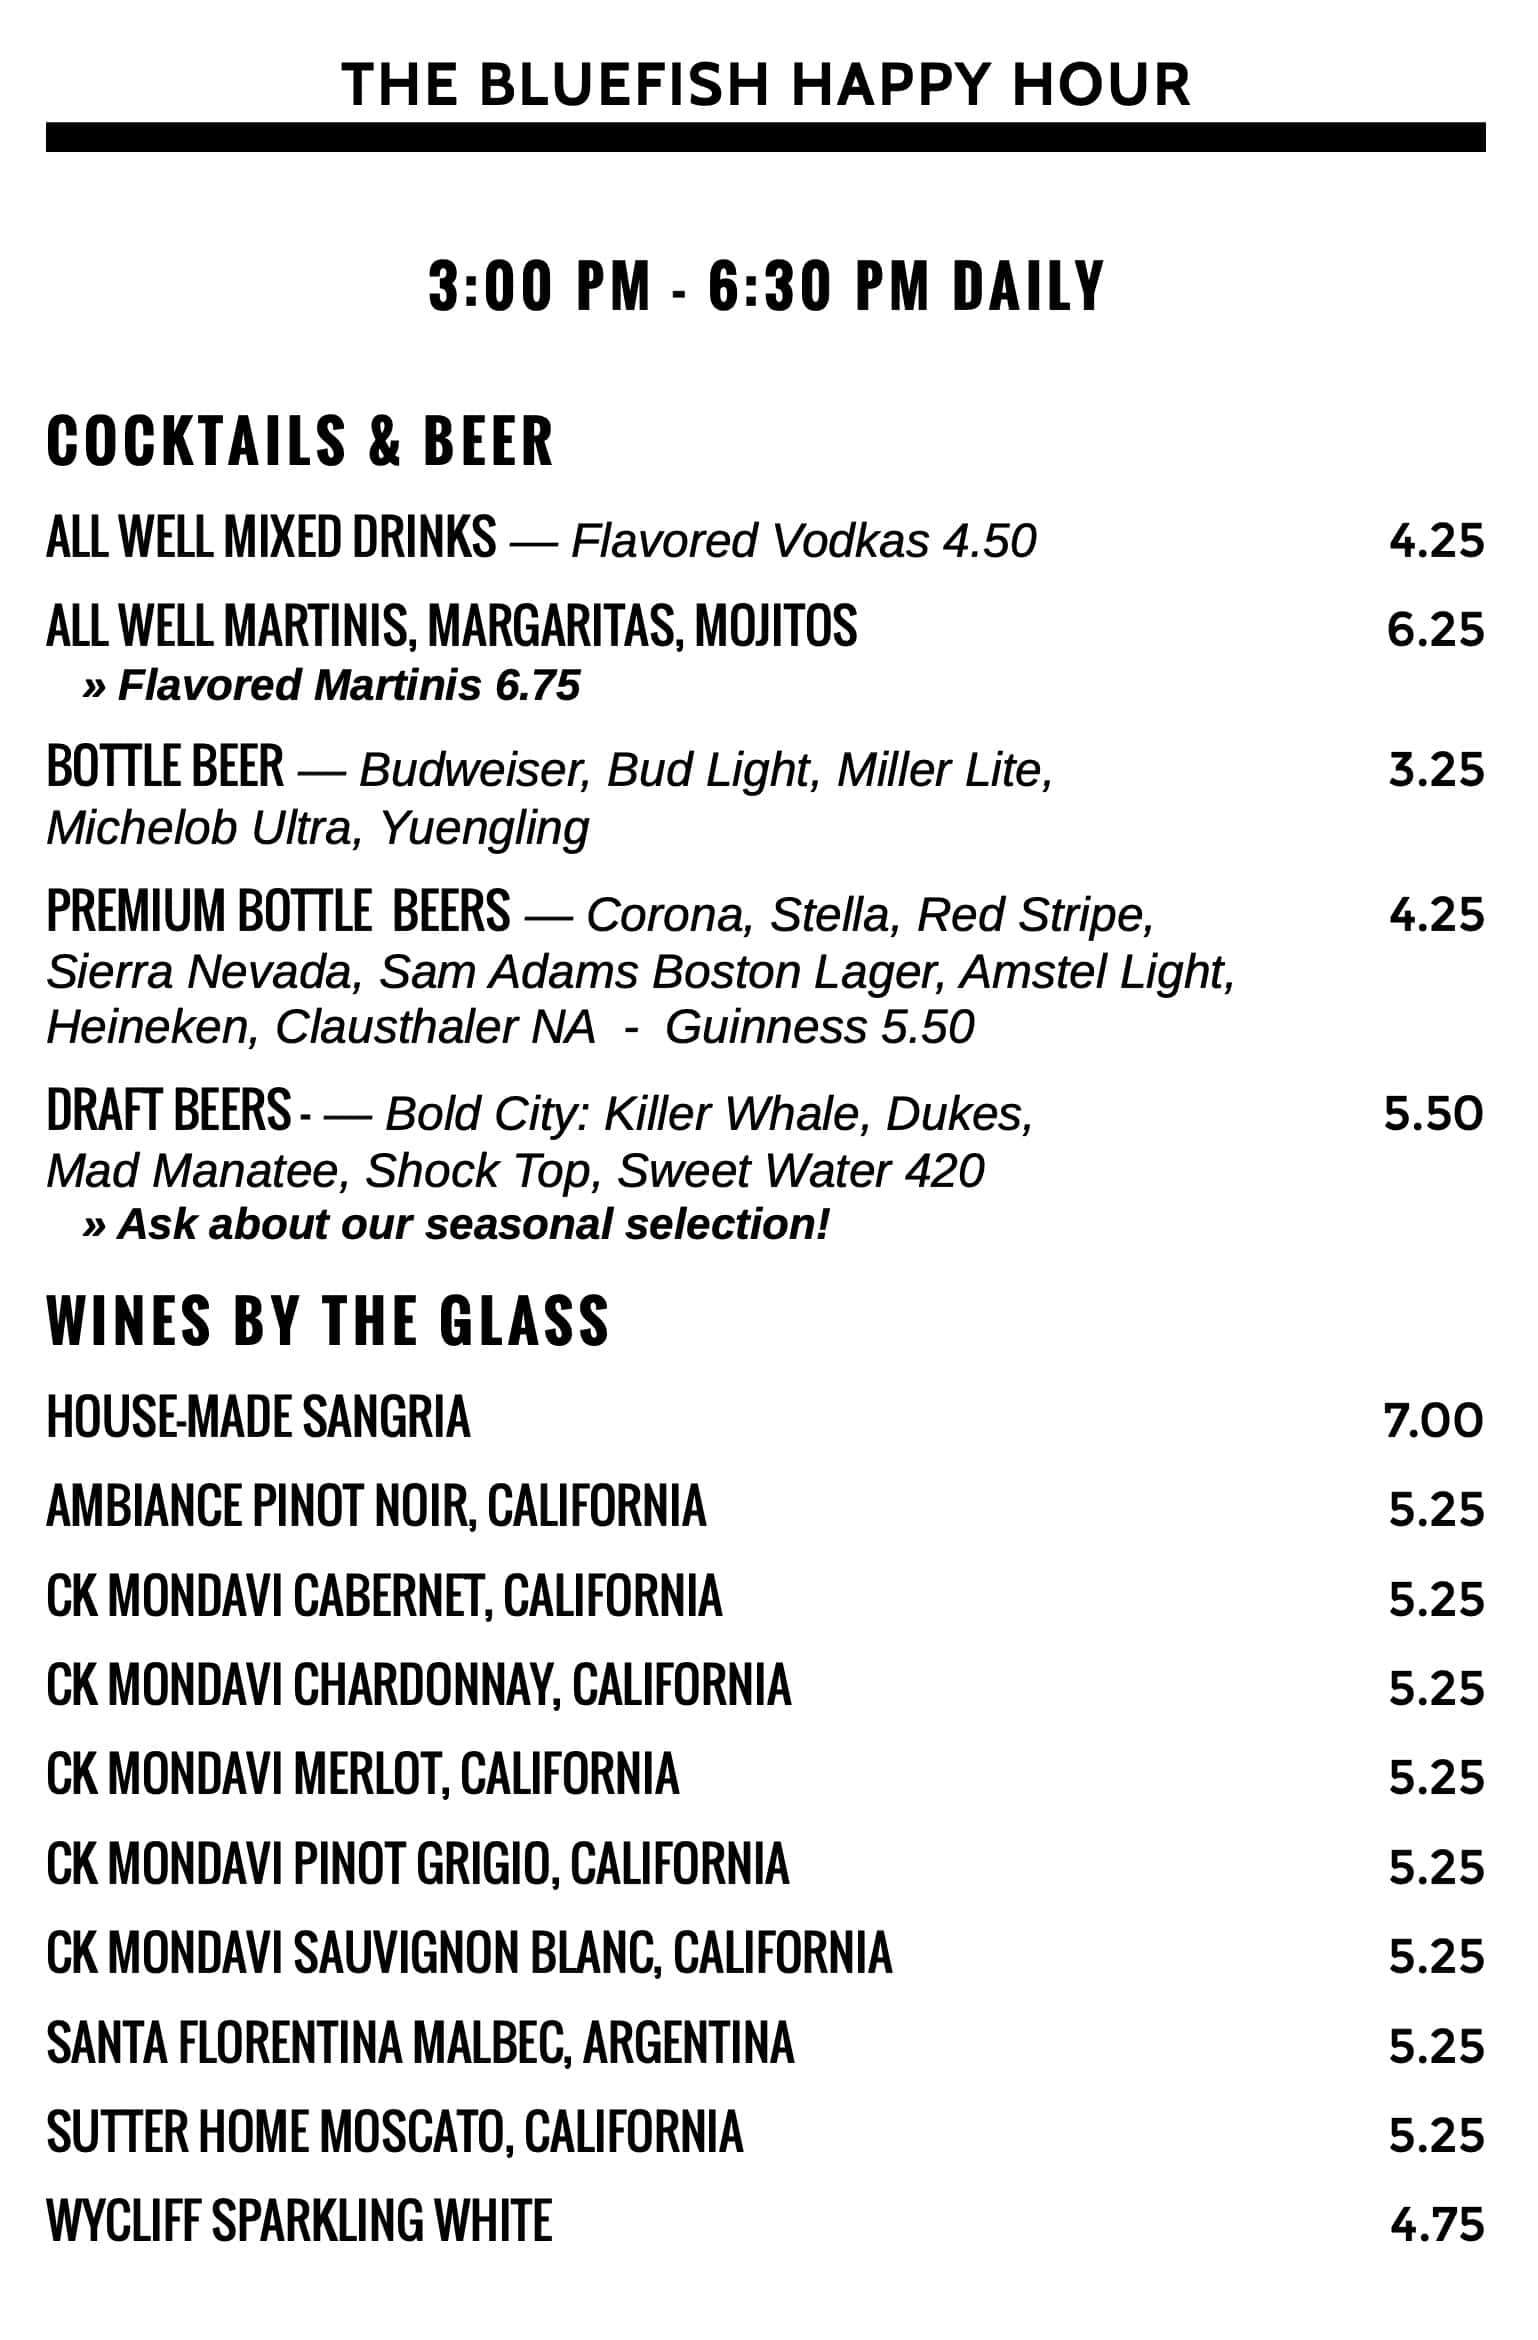 The Blue Fish Restaurant and Oyster Bar Happy Hour Menu